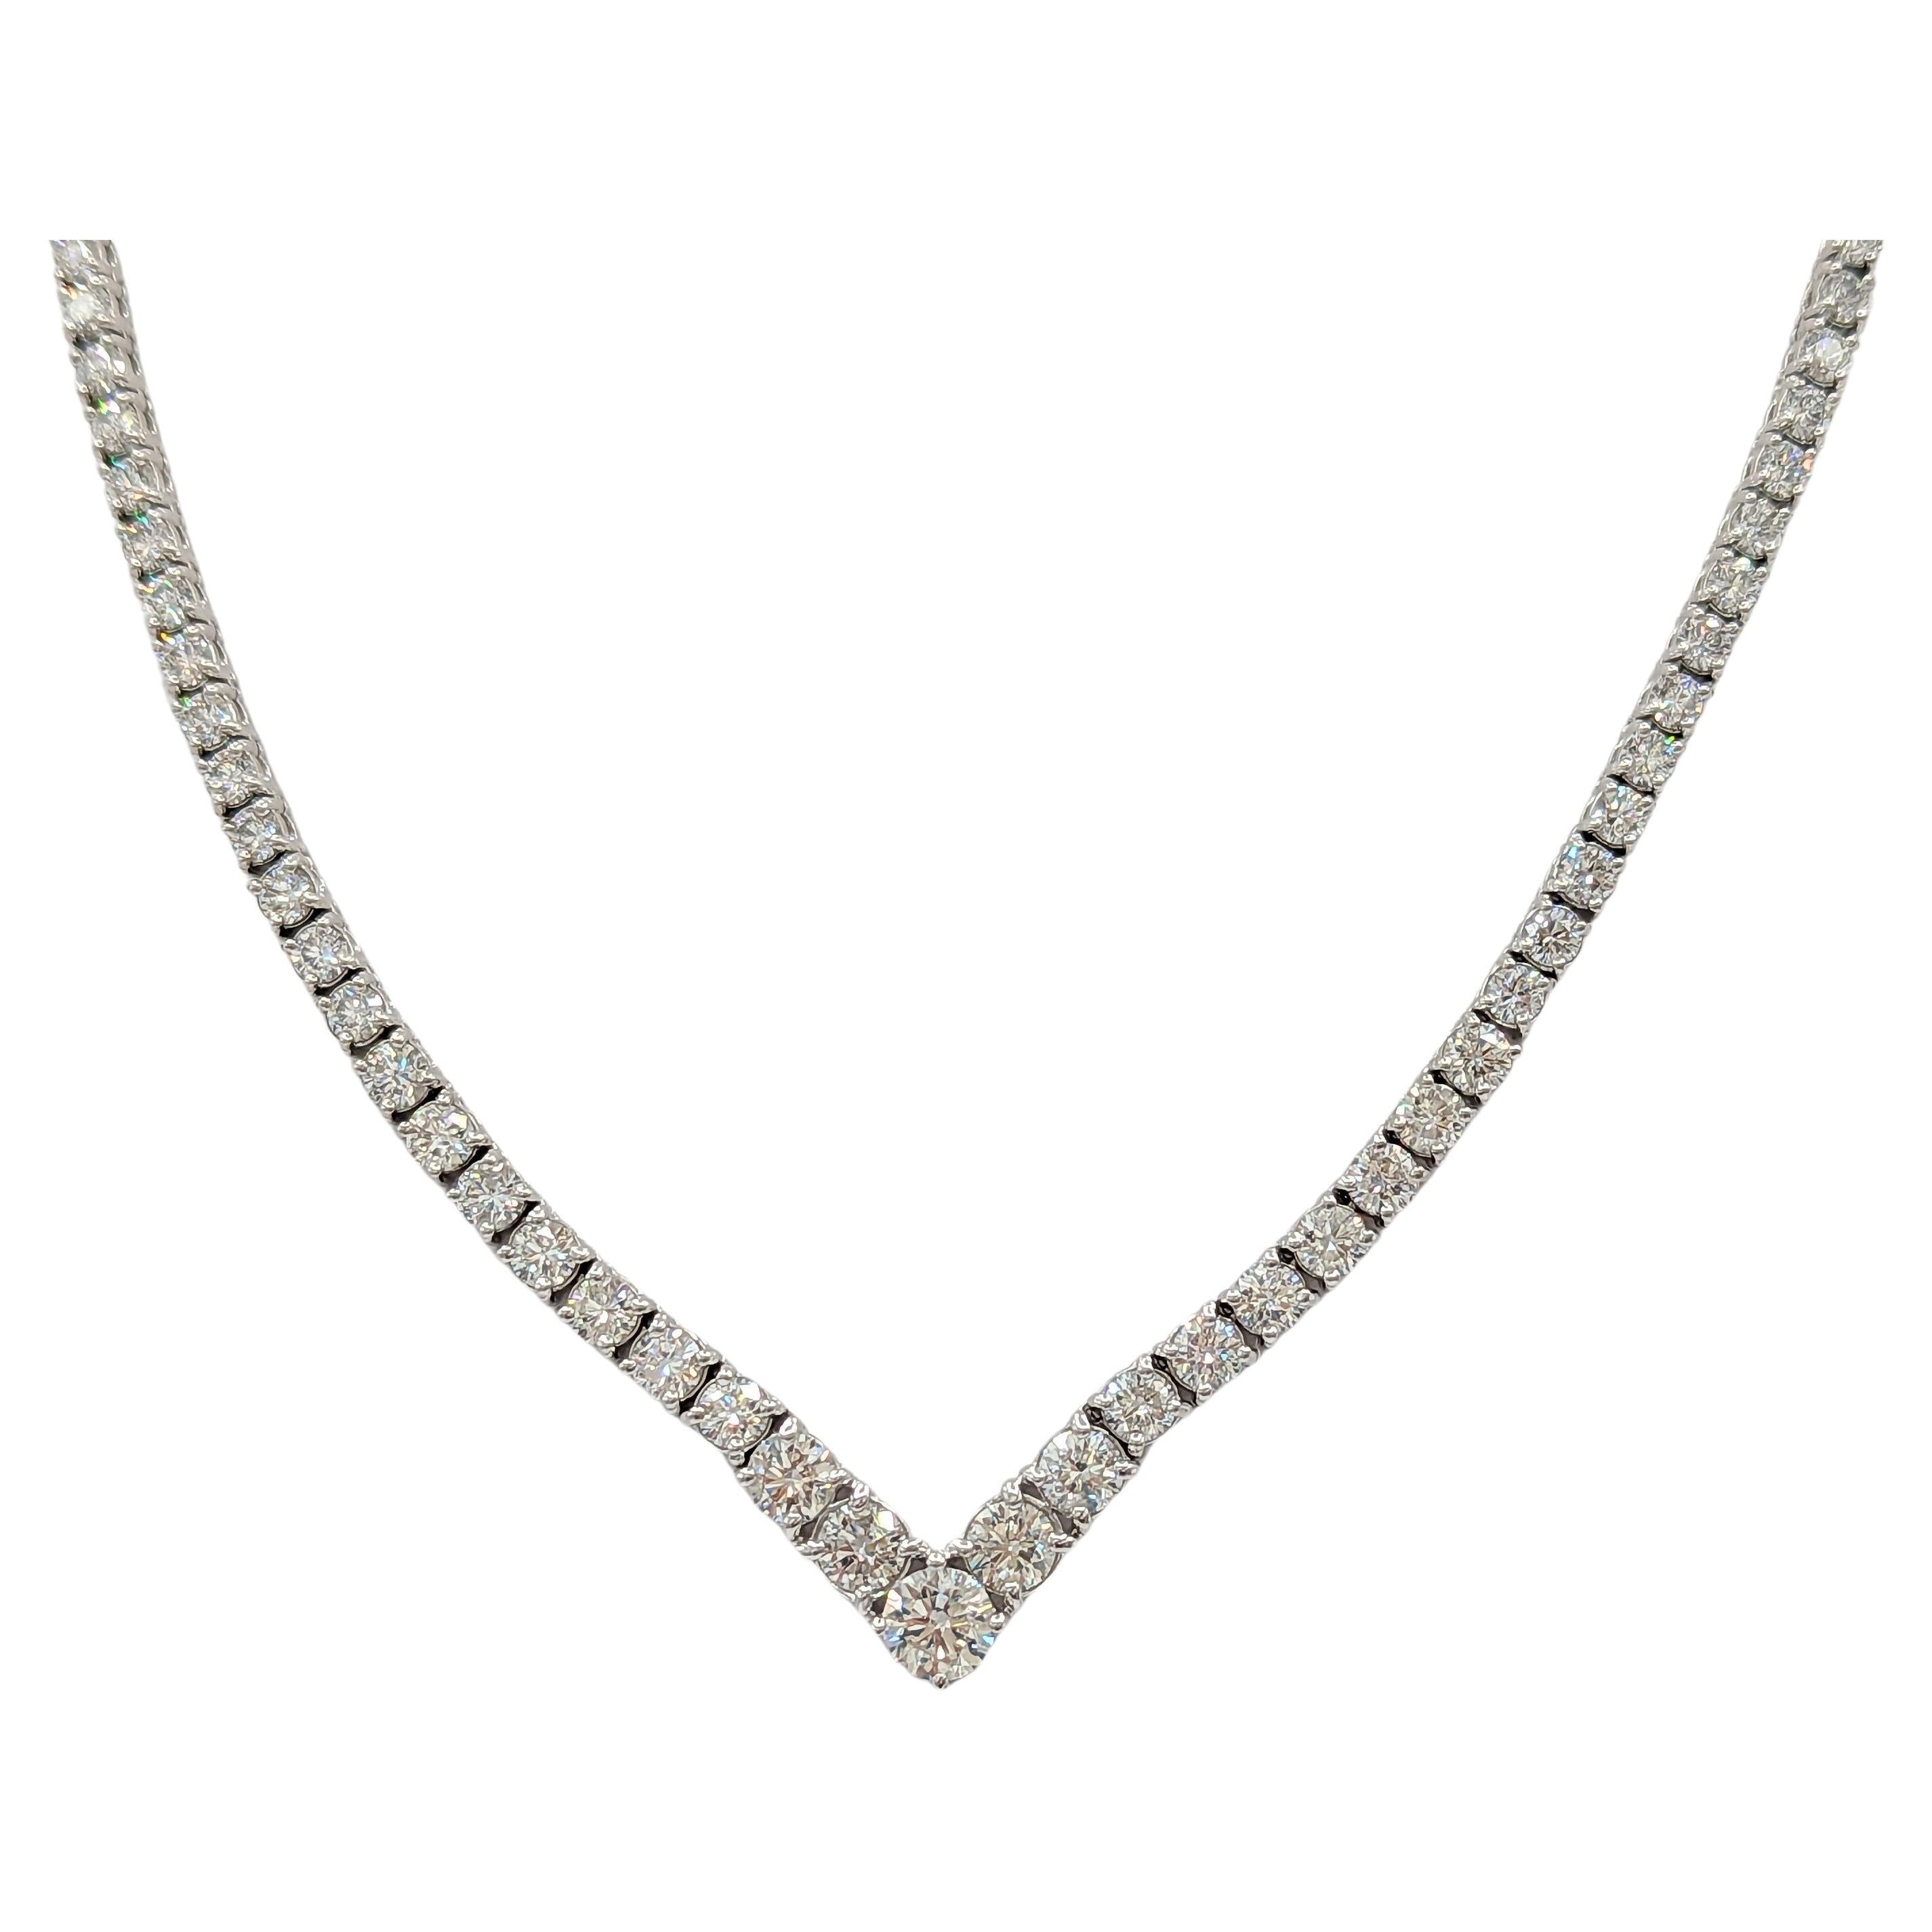  V-Shape Graduated White Round Diamond Tennis Necklace in 14K White Gold For Sale